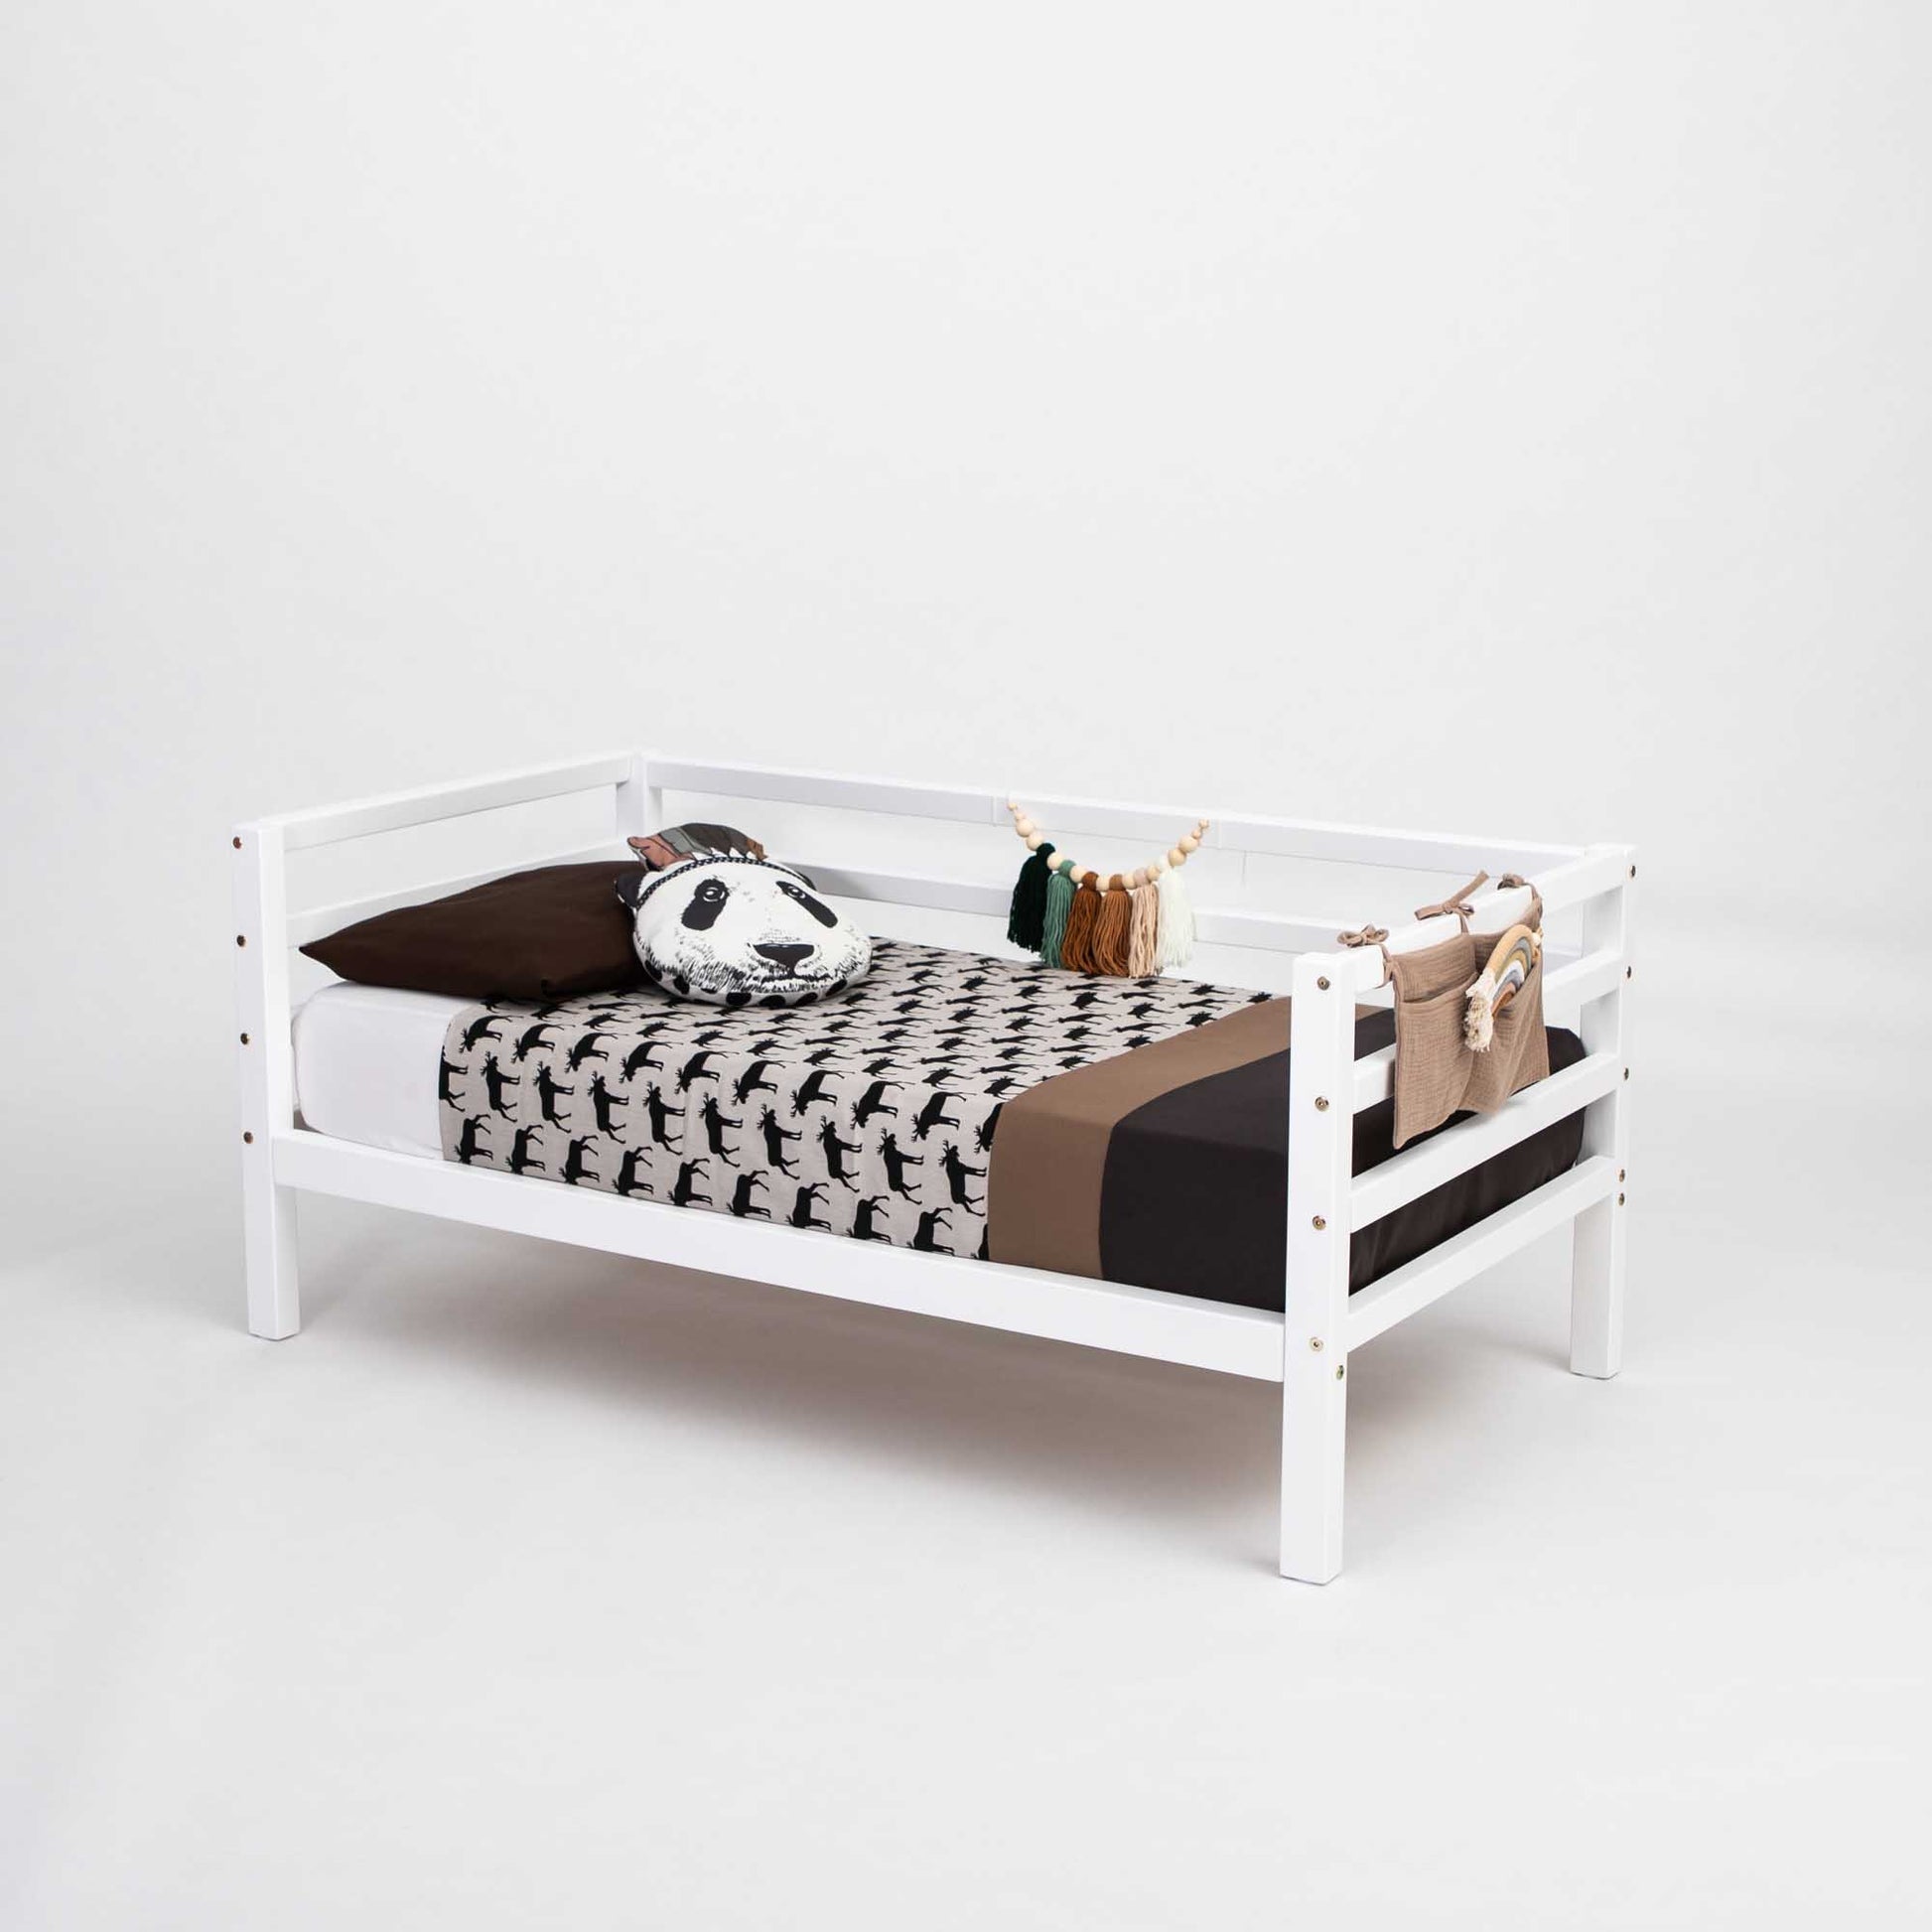 A white wooden 2-in-1 transformable kids' bed with a soccer ball on it, perfect for boys who love sports, from the brand Sweet Home From Wood.